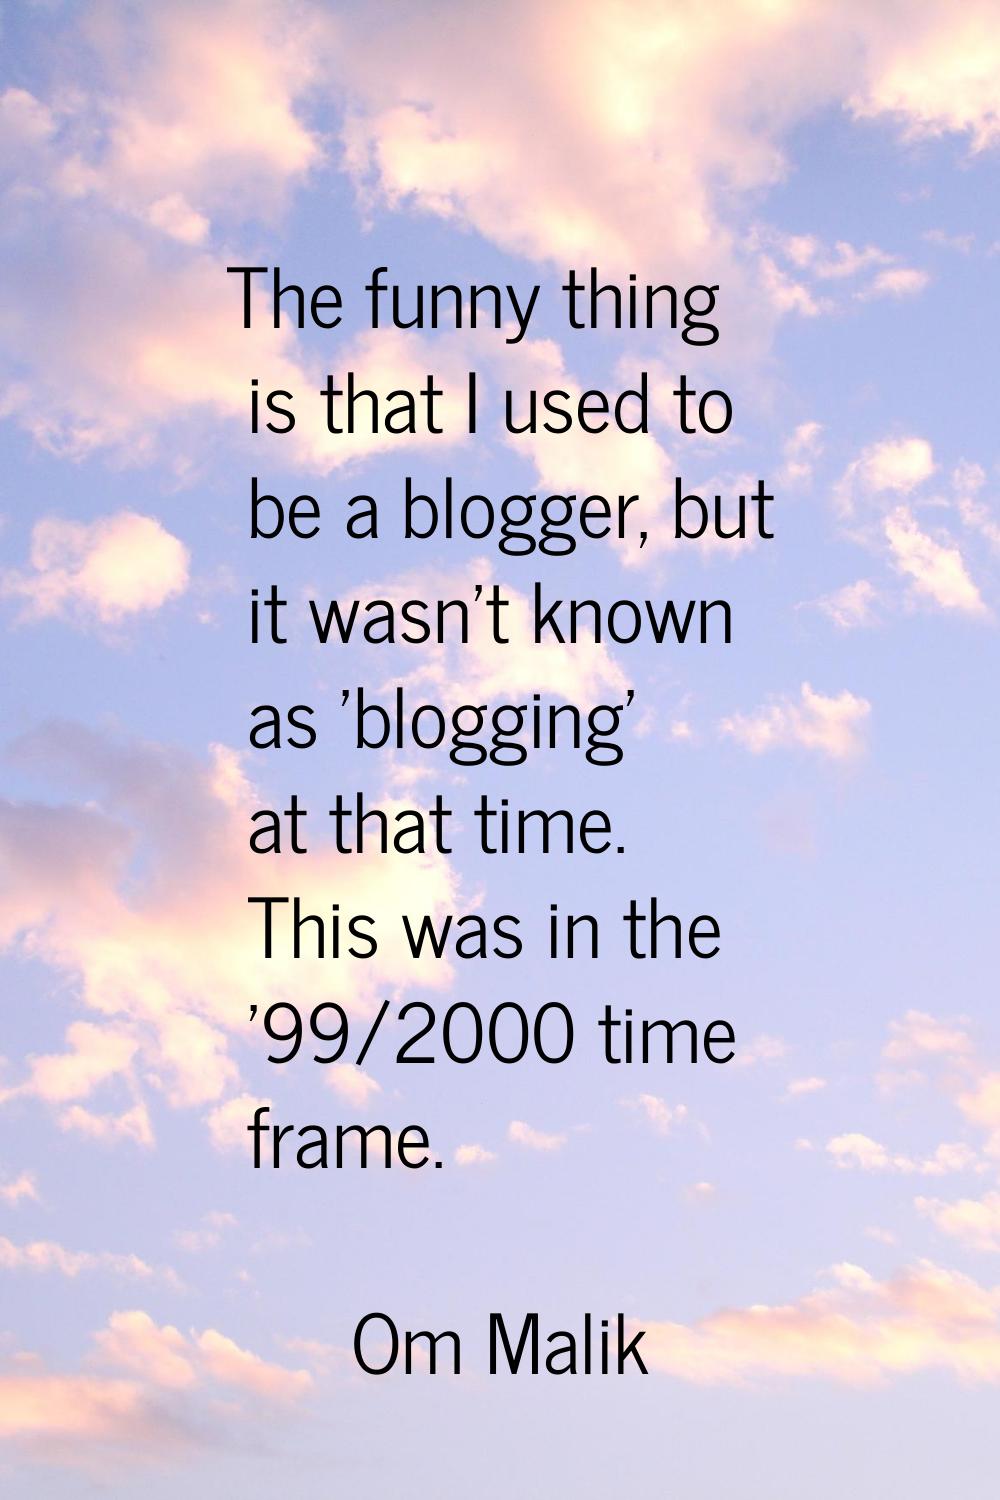 The funny thing is that I used to be a blogger, but it wasn't known as 'blogging' at that time. Thi